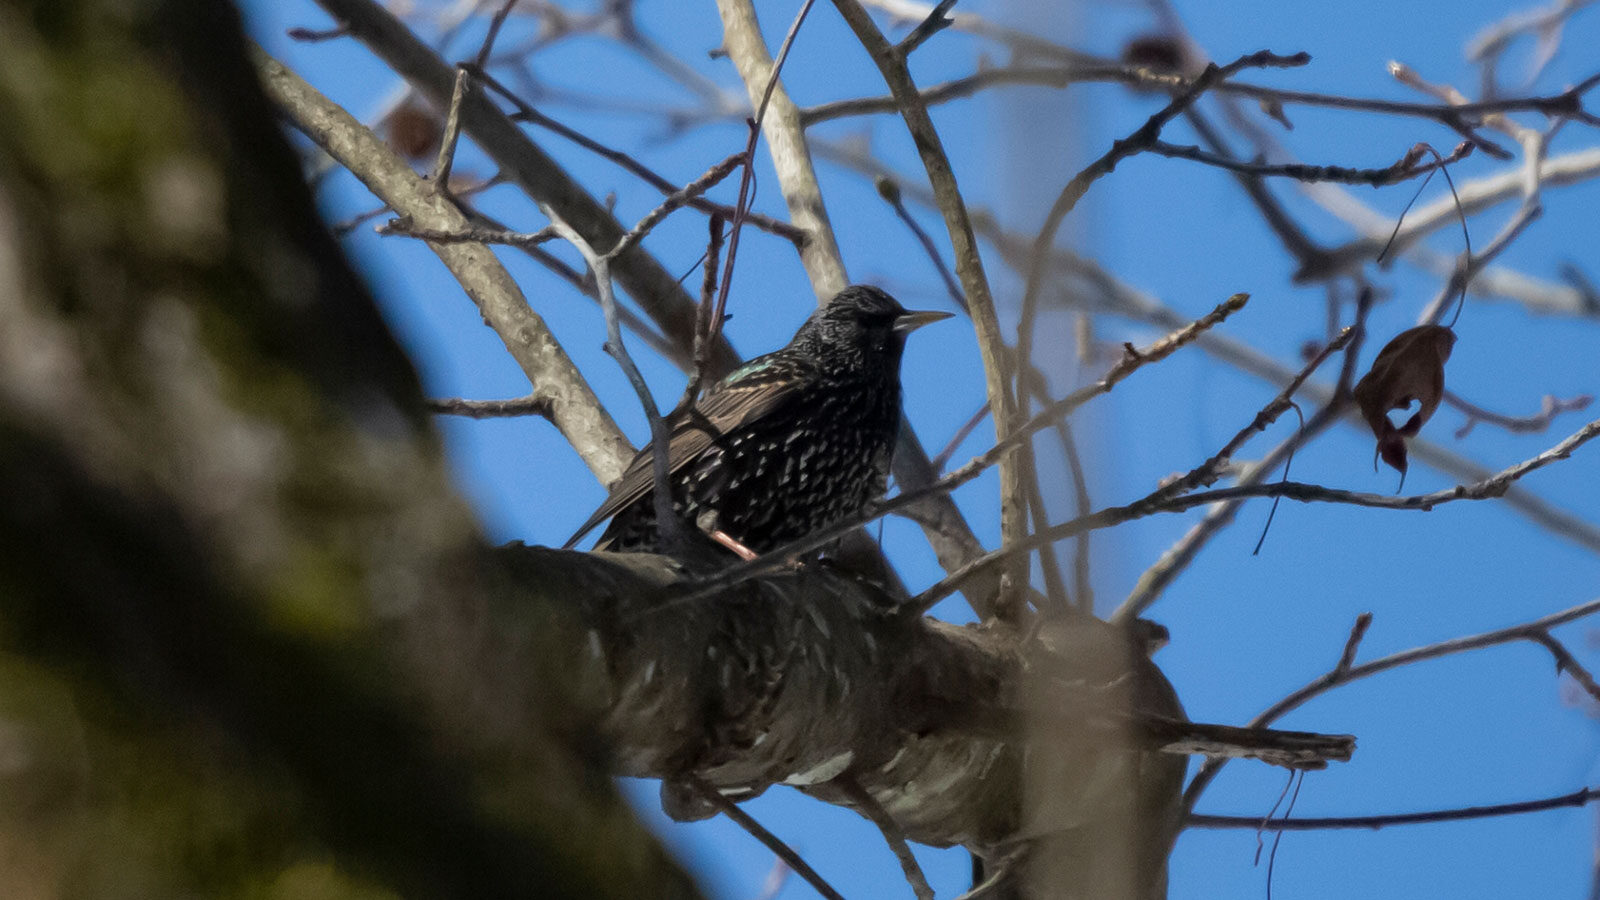 European (common) starling on a tree branch